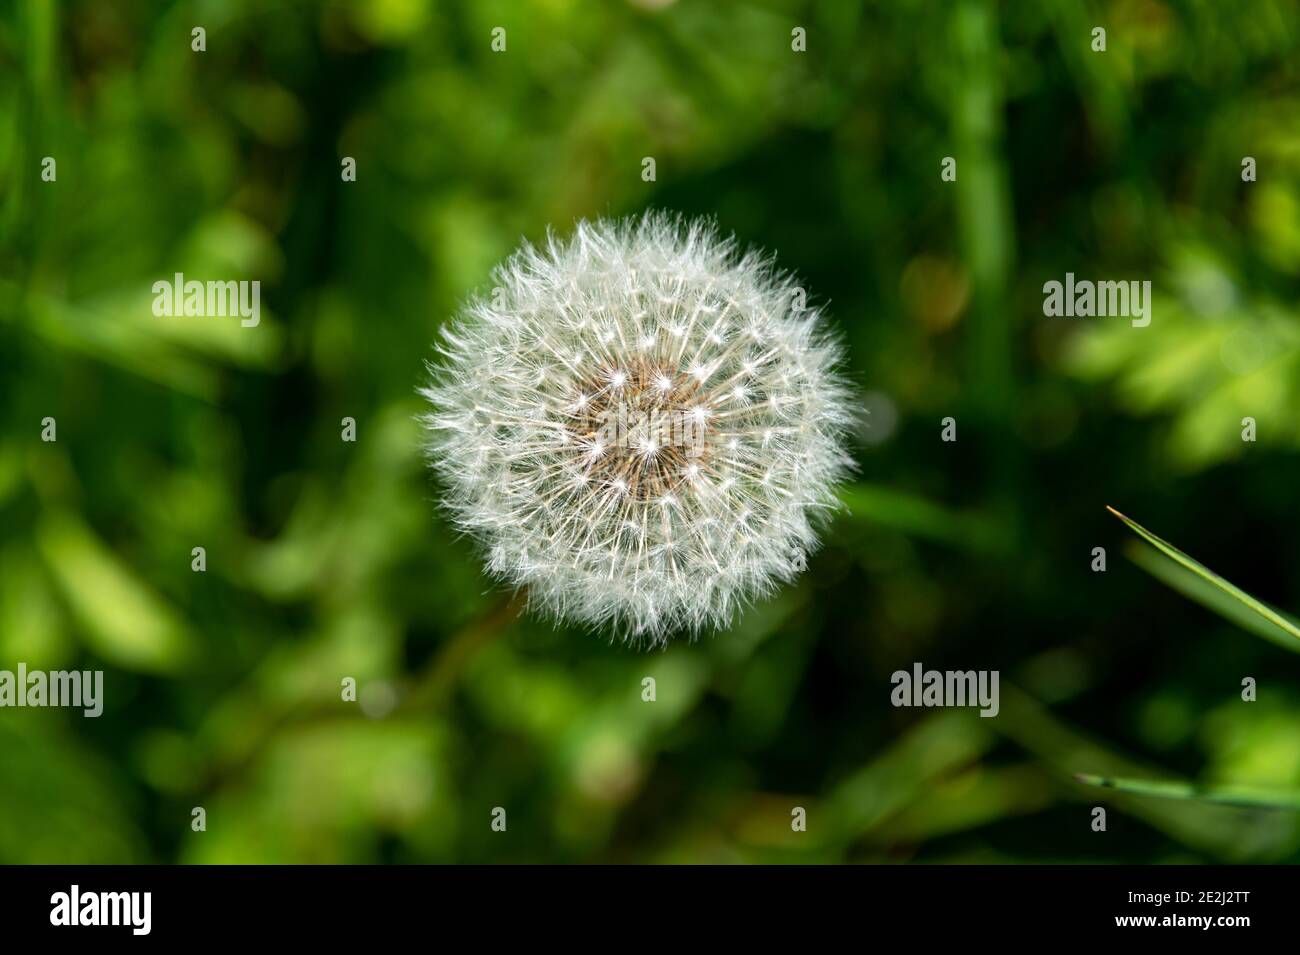 Close up of a Dandelion (Taraxacum officinale) with soft green background. Photographed from above. Stock Photo